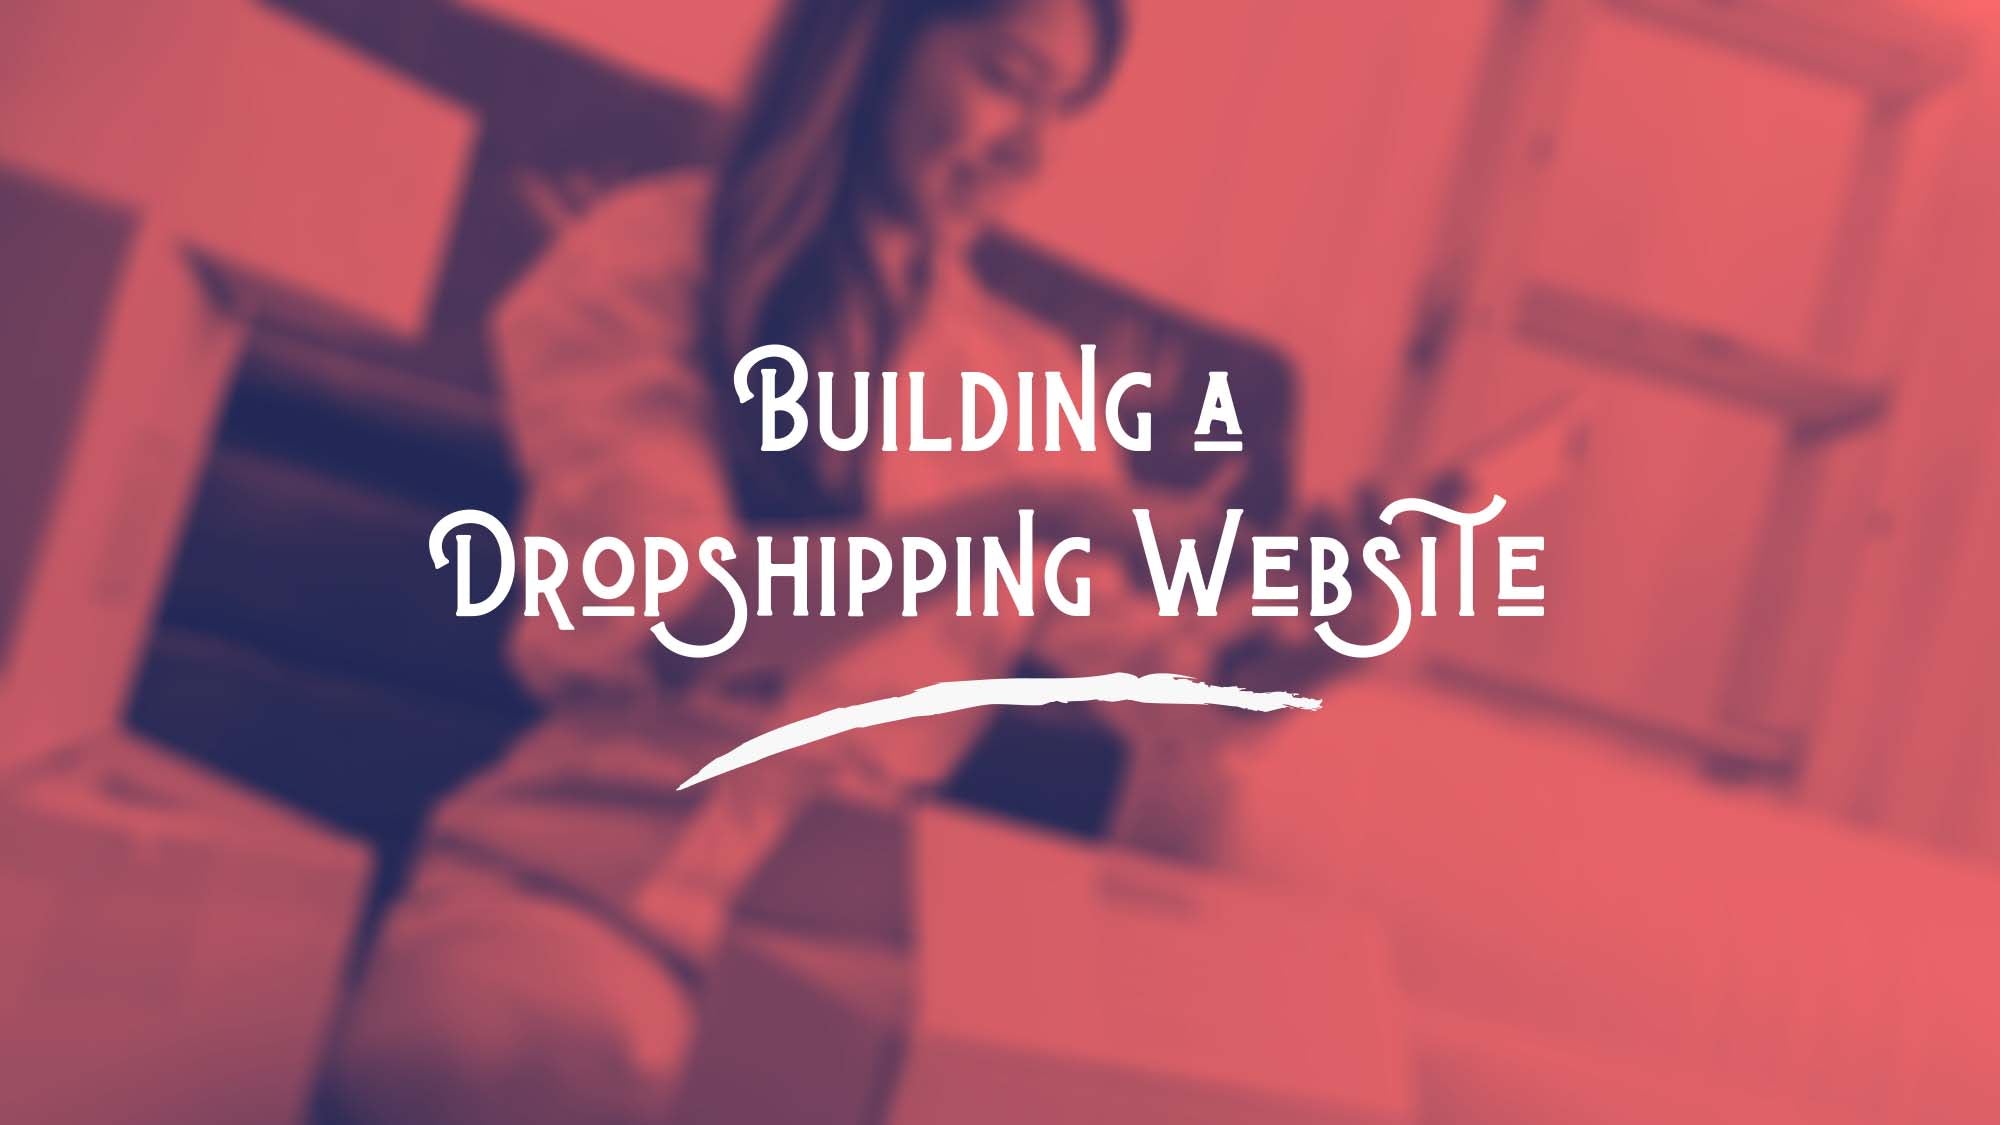 Dropshipping For Beginners: Building A Dropshipping Website